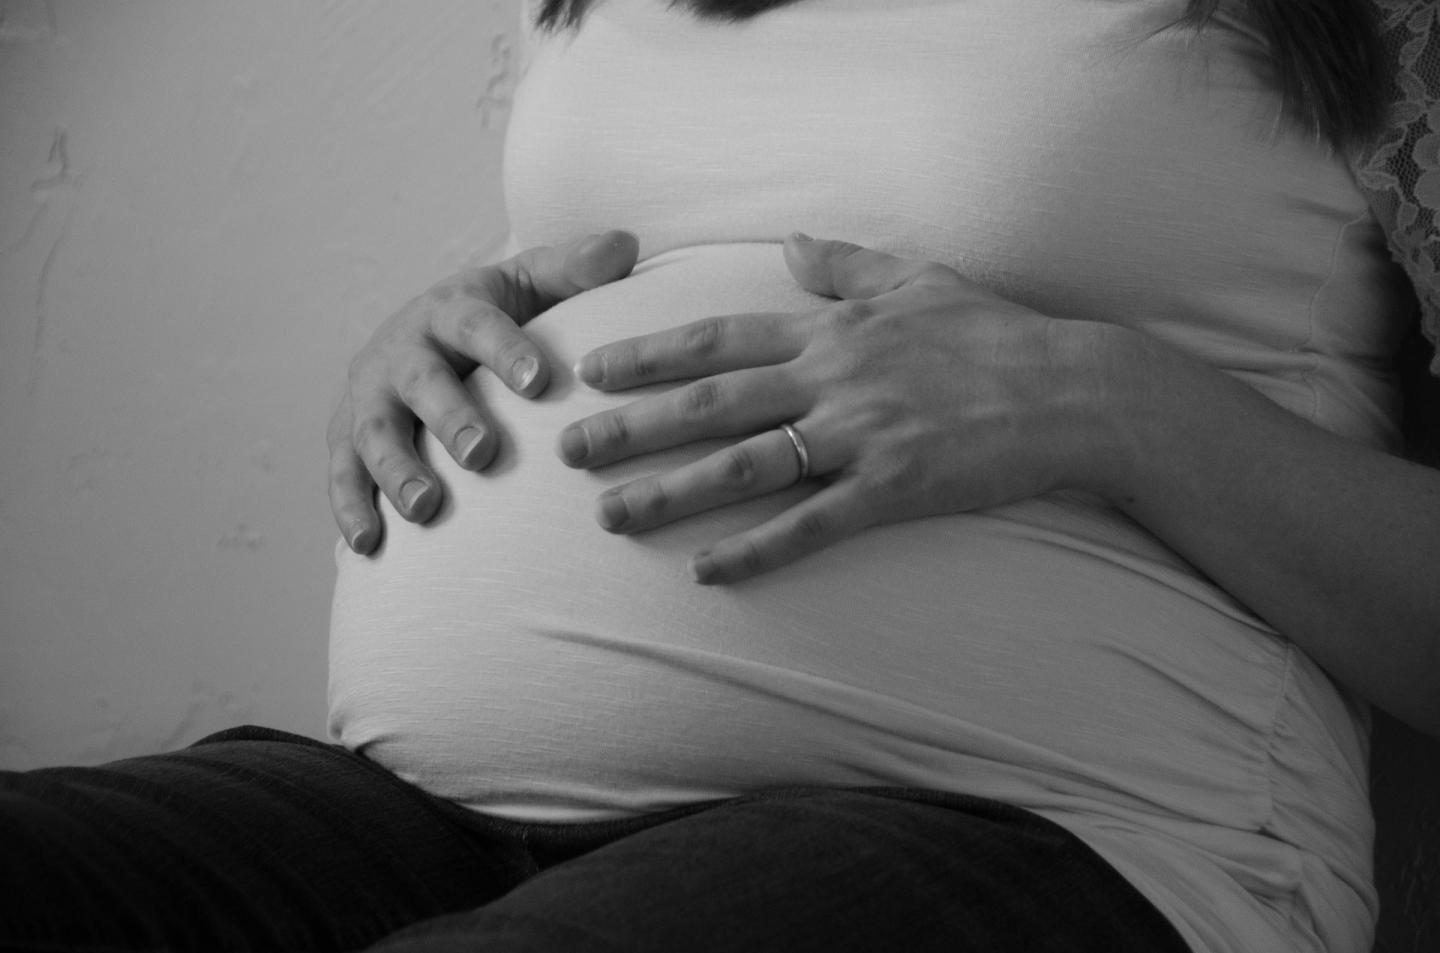 Women with Obesity Prior to Conception Are More Likely to Have Children with Obesity